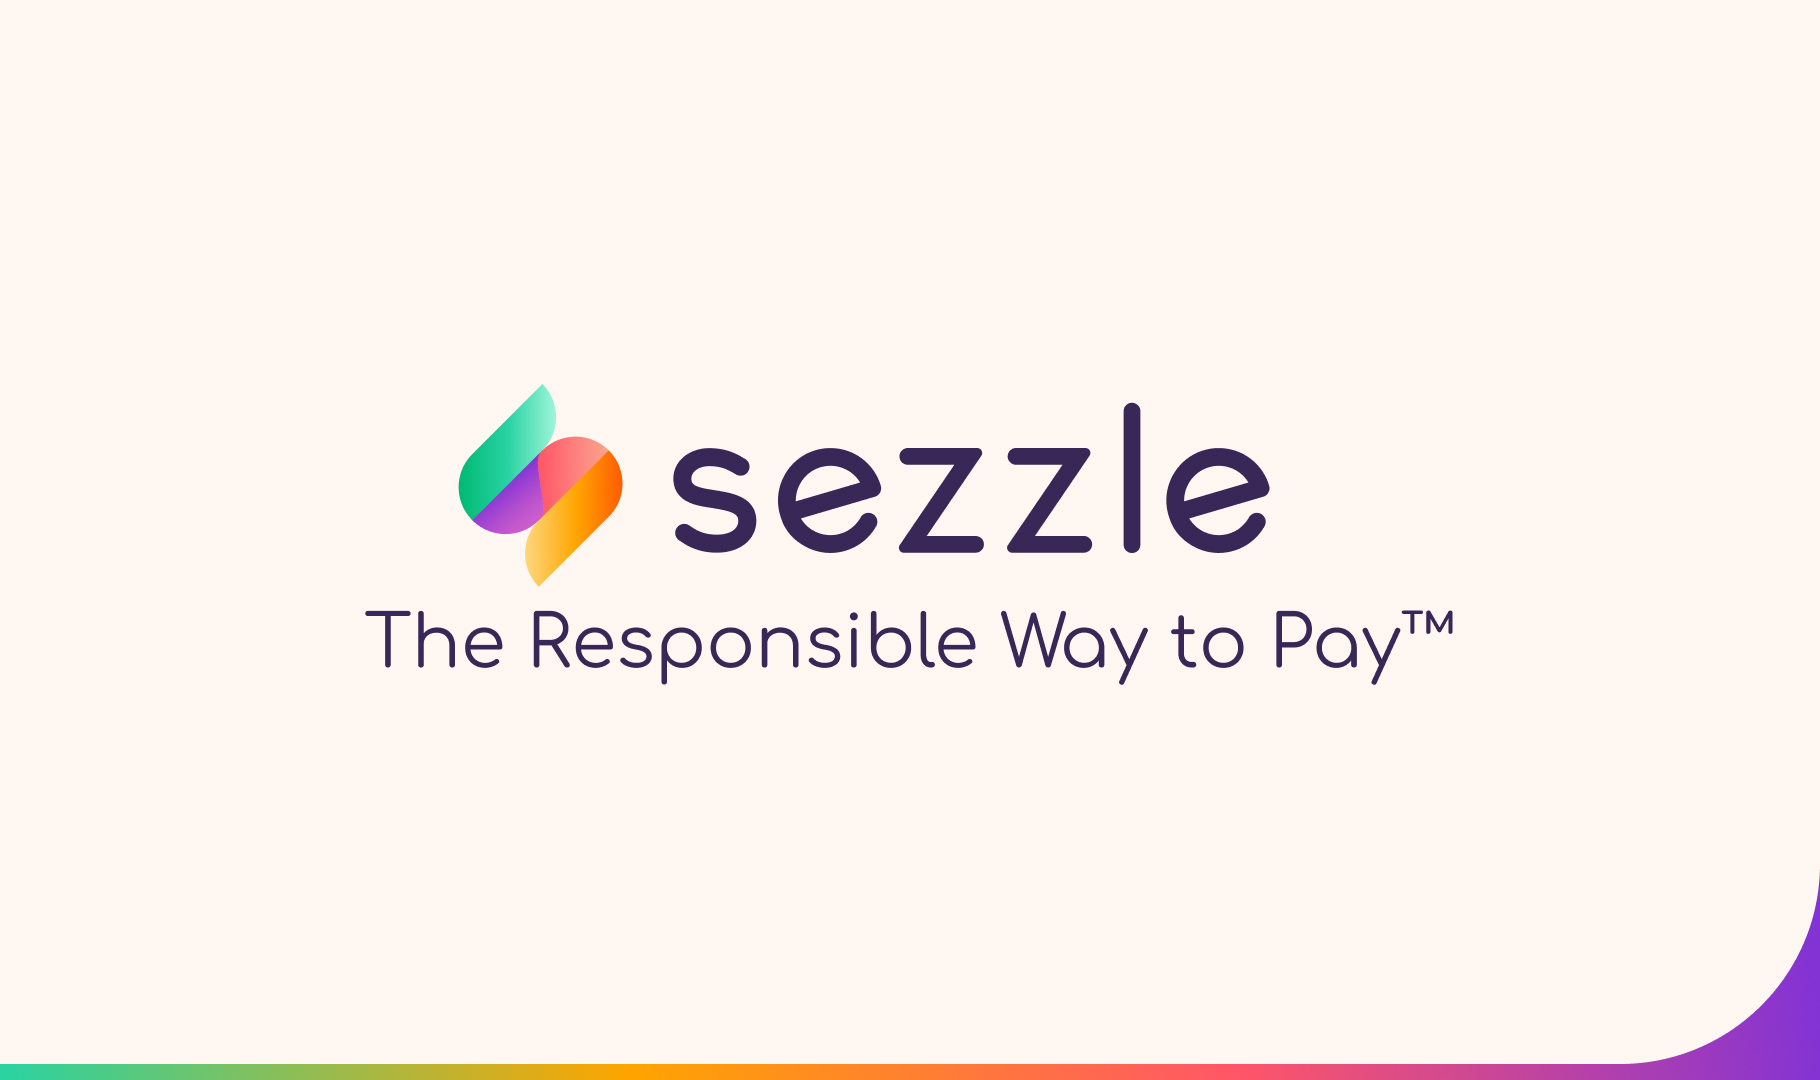 Sezzle & Afterpay In Store Purchase | Amendolaro